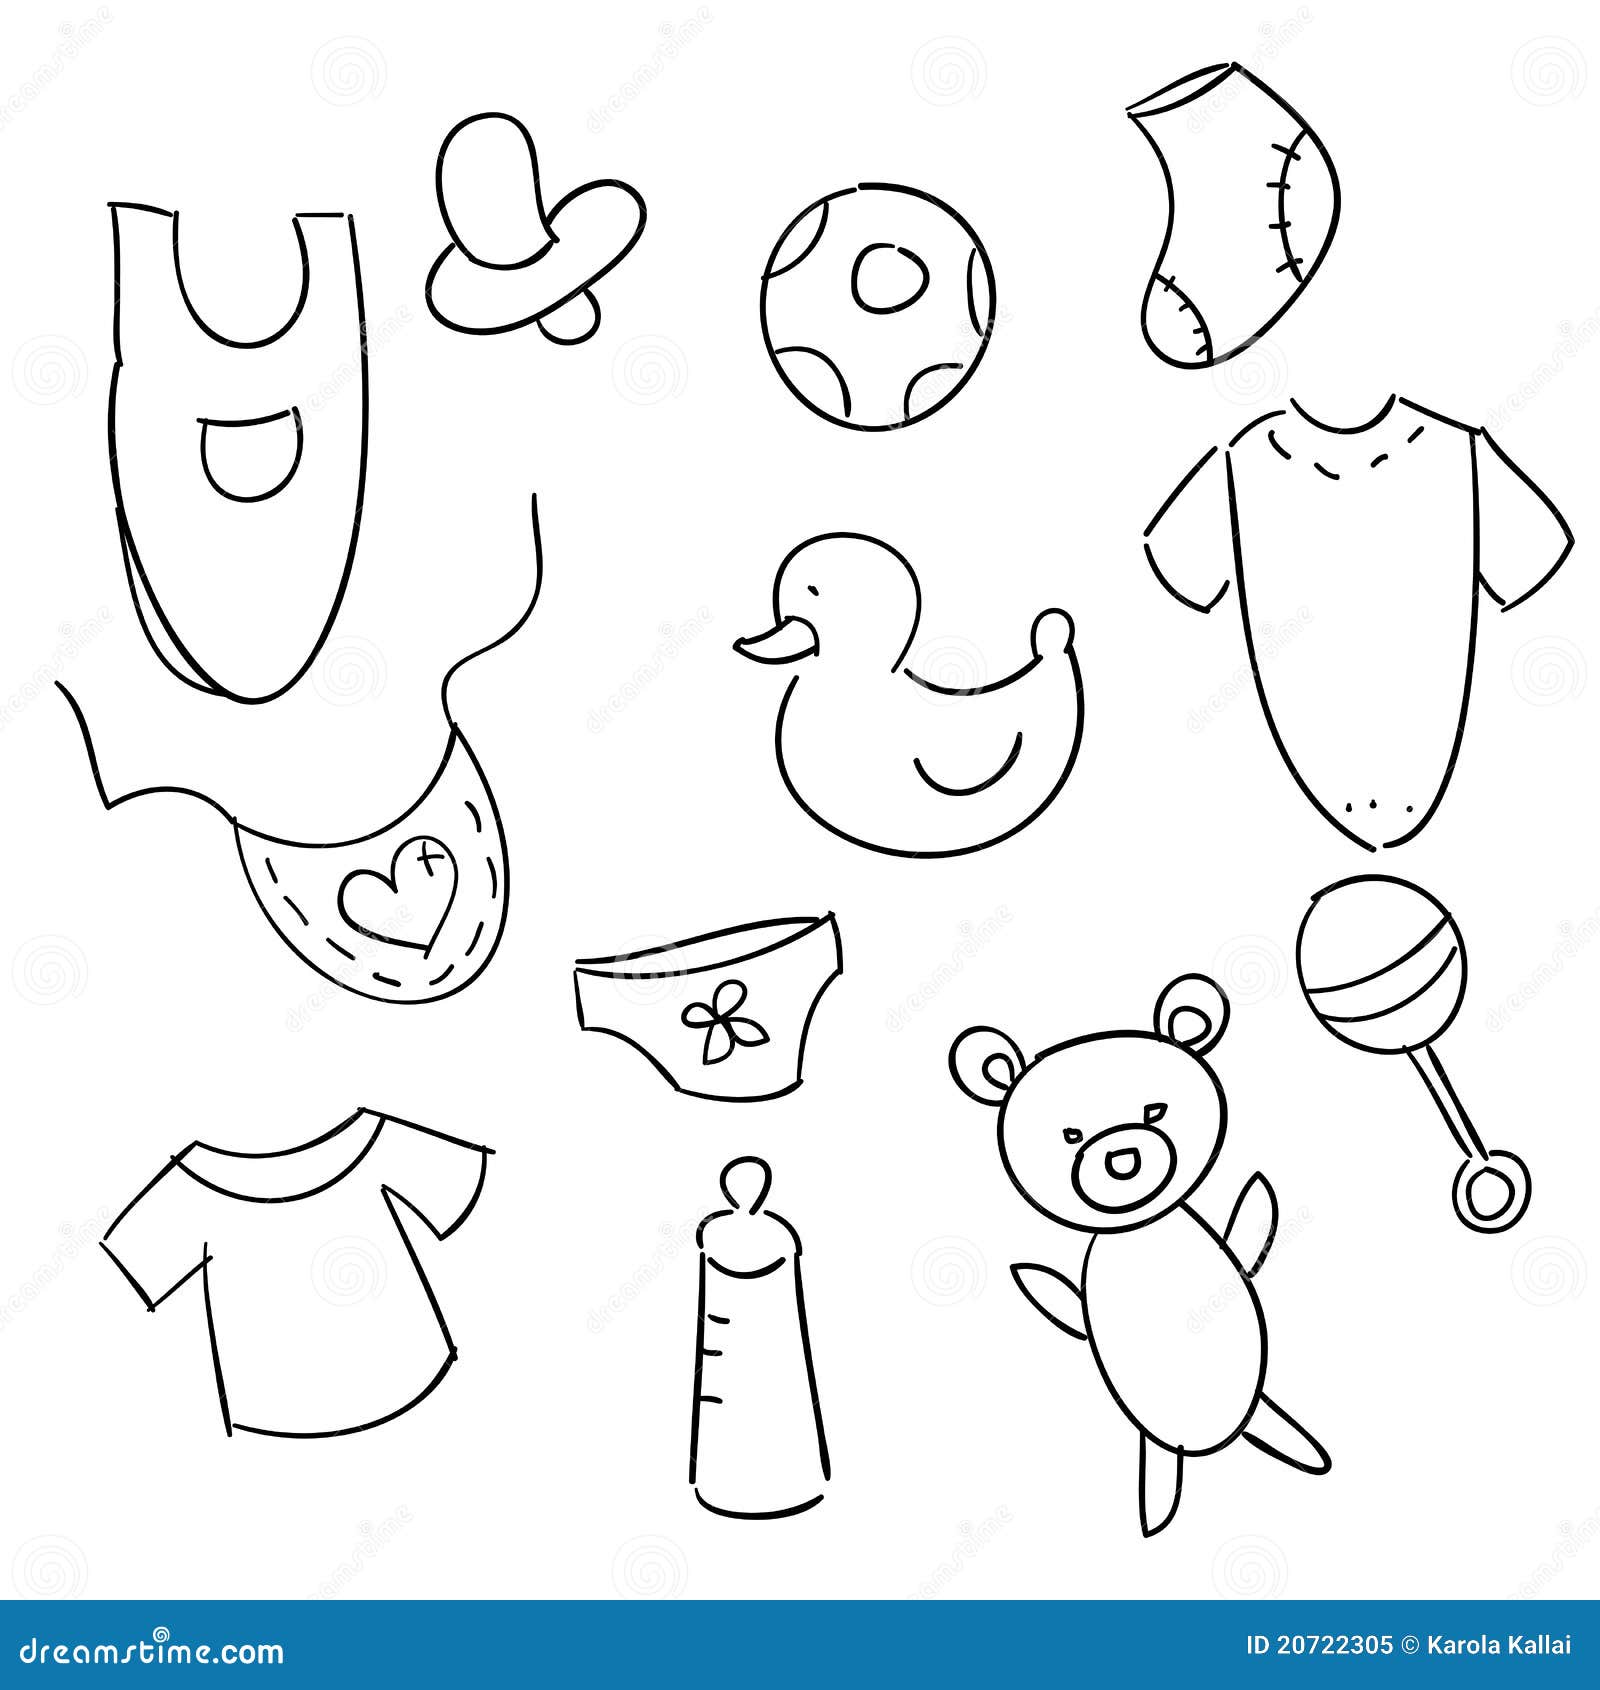 Hand Drawn Baby Icons Royalty Free Stock Photo - Image: 20722305